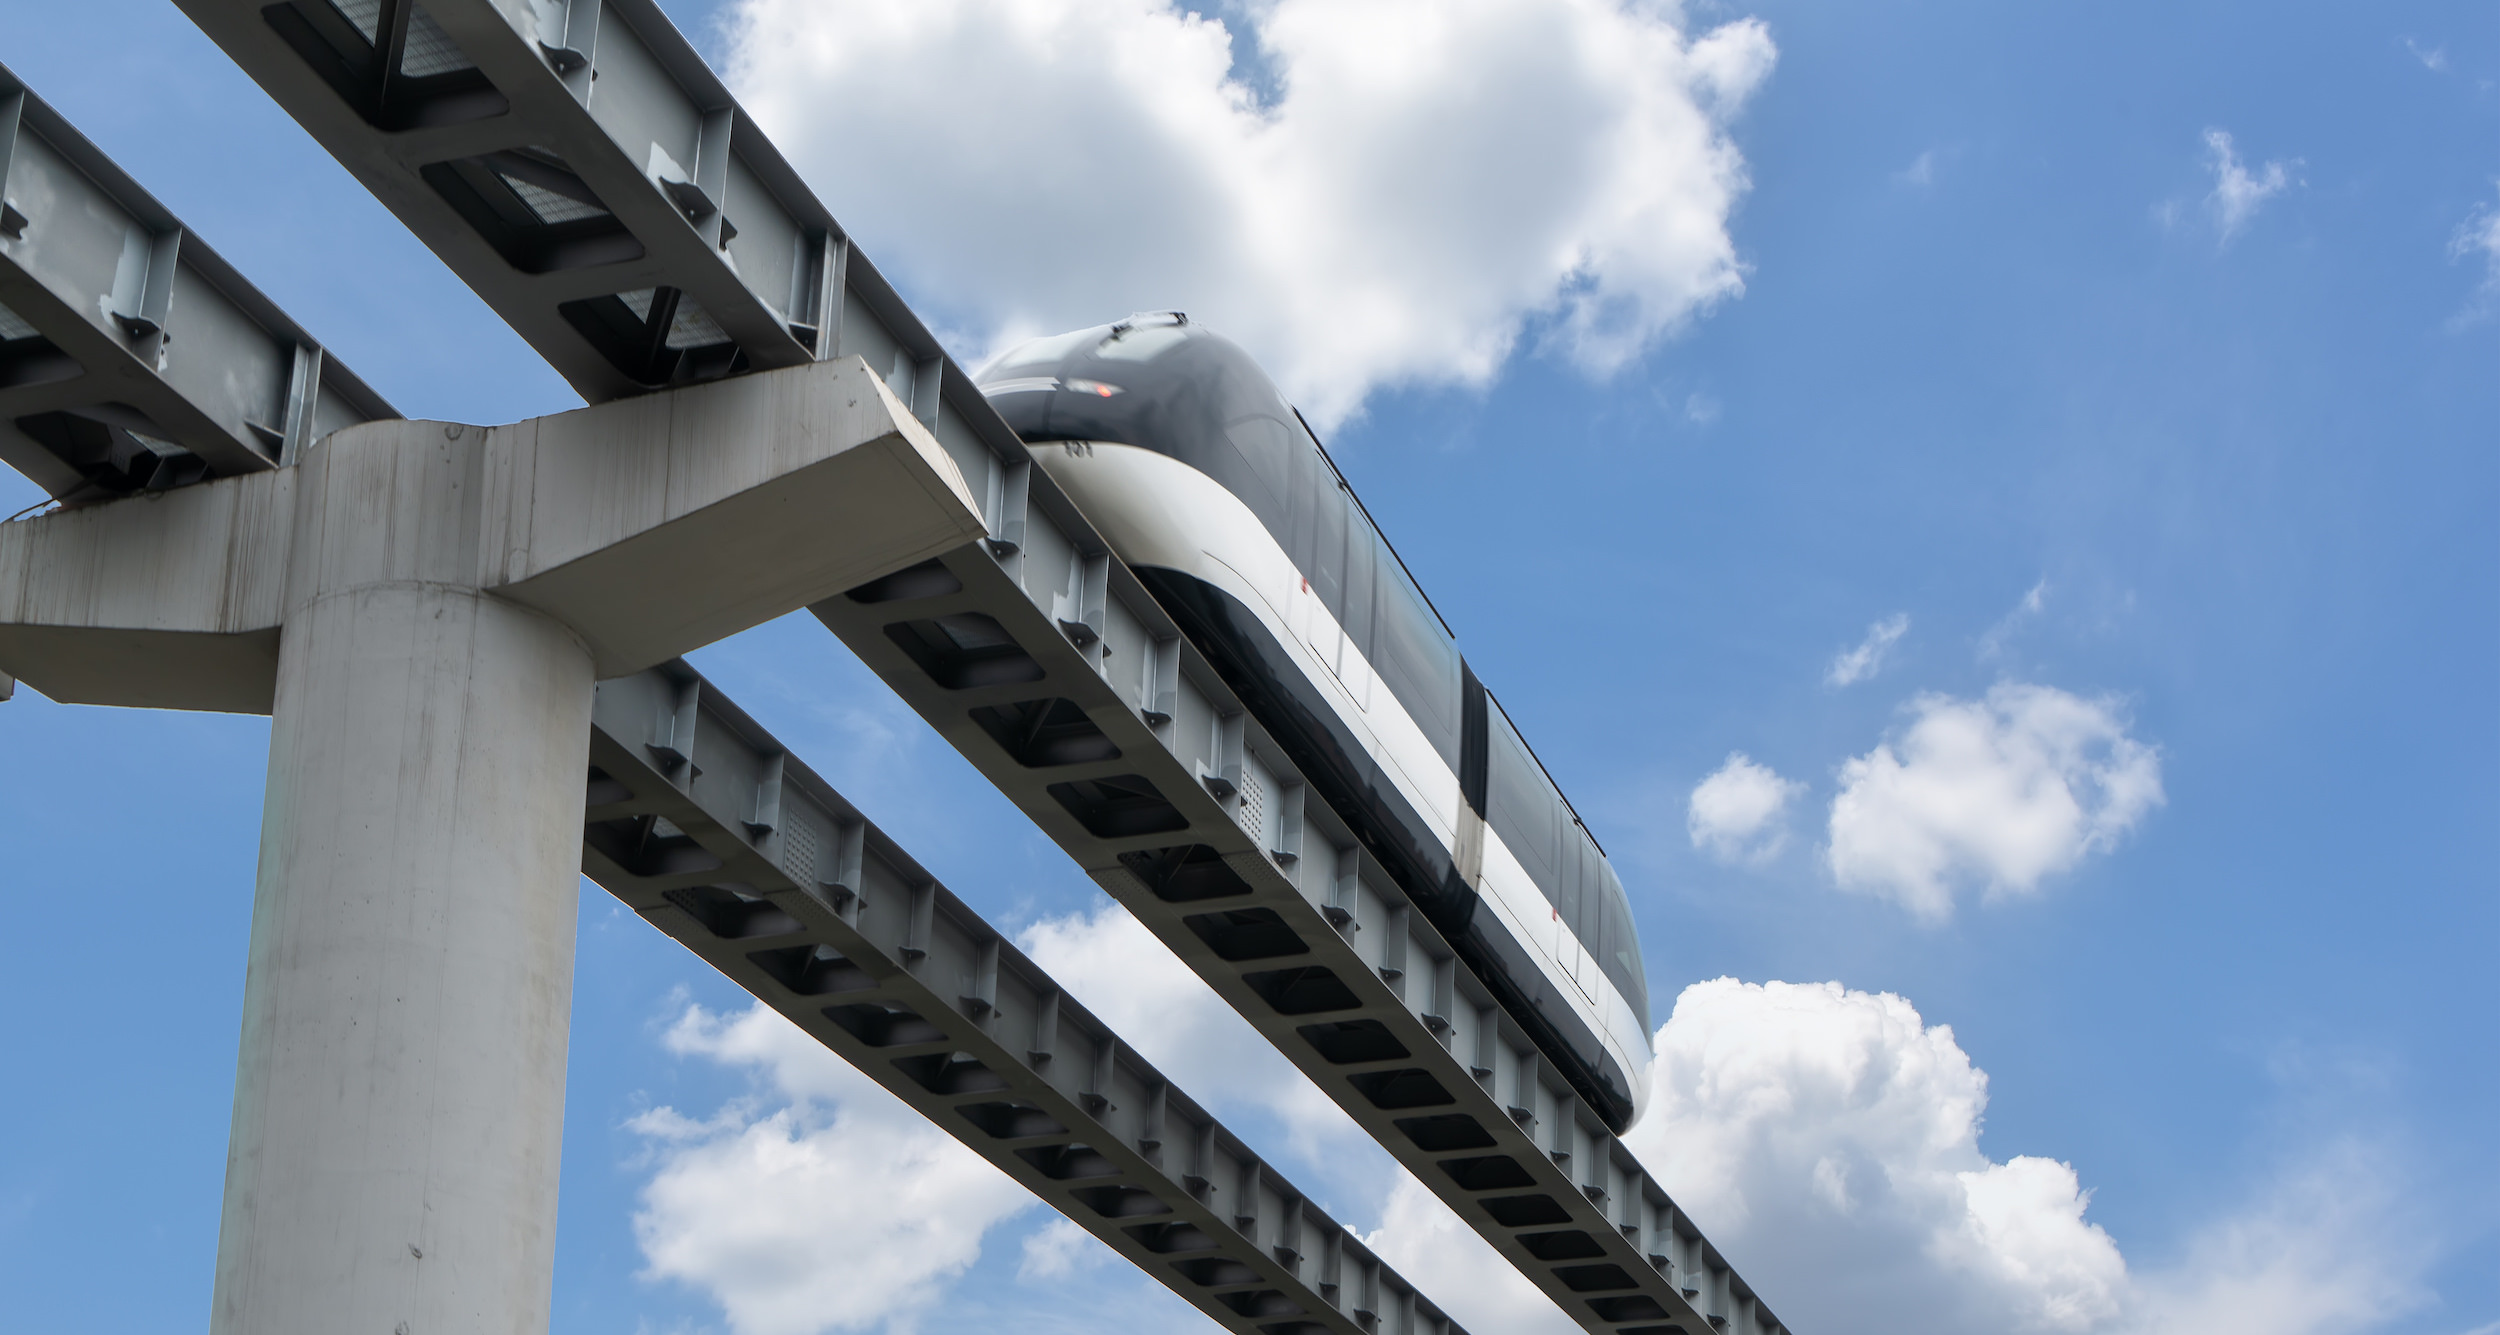 silver used in superconducting electromagnets used to power maglev trains